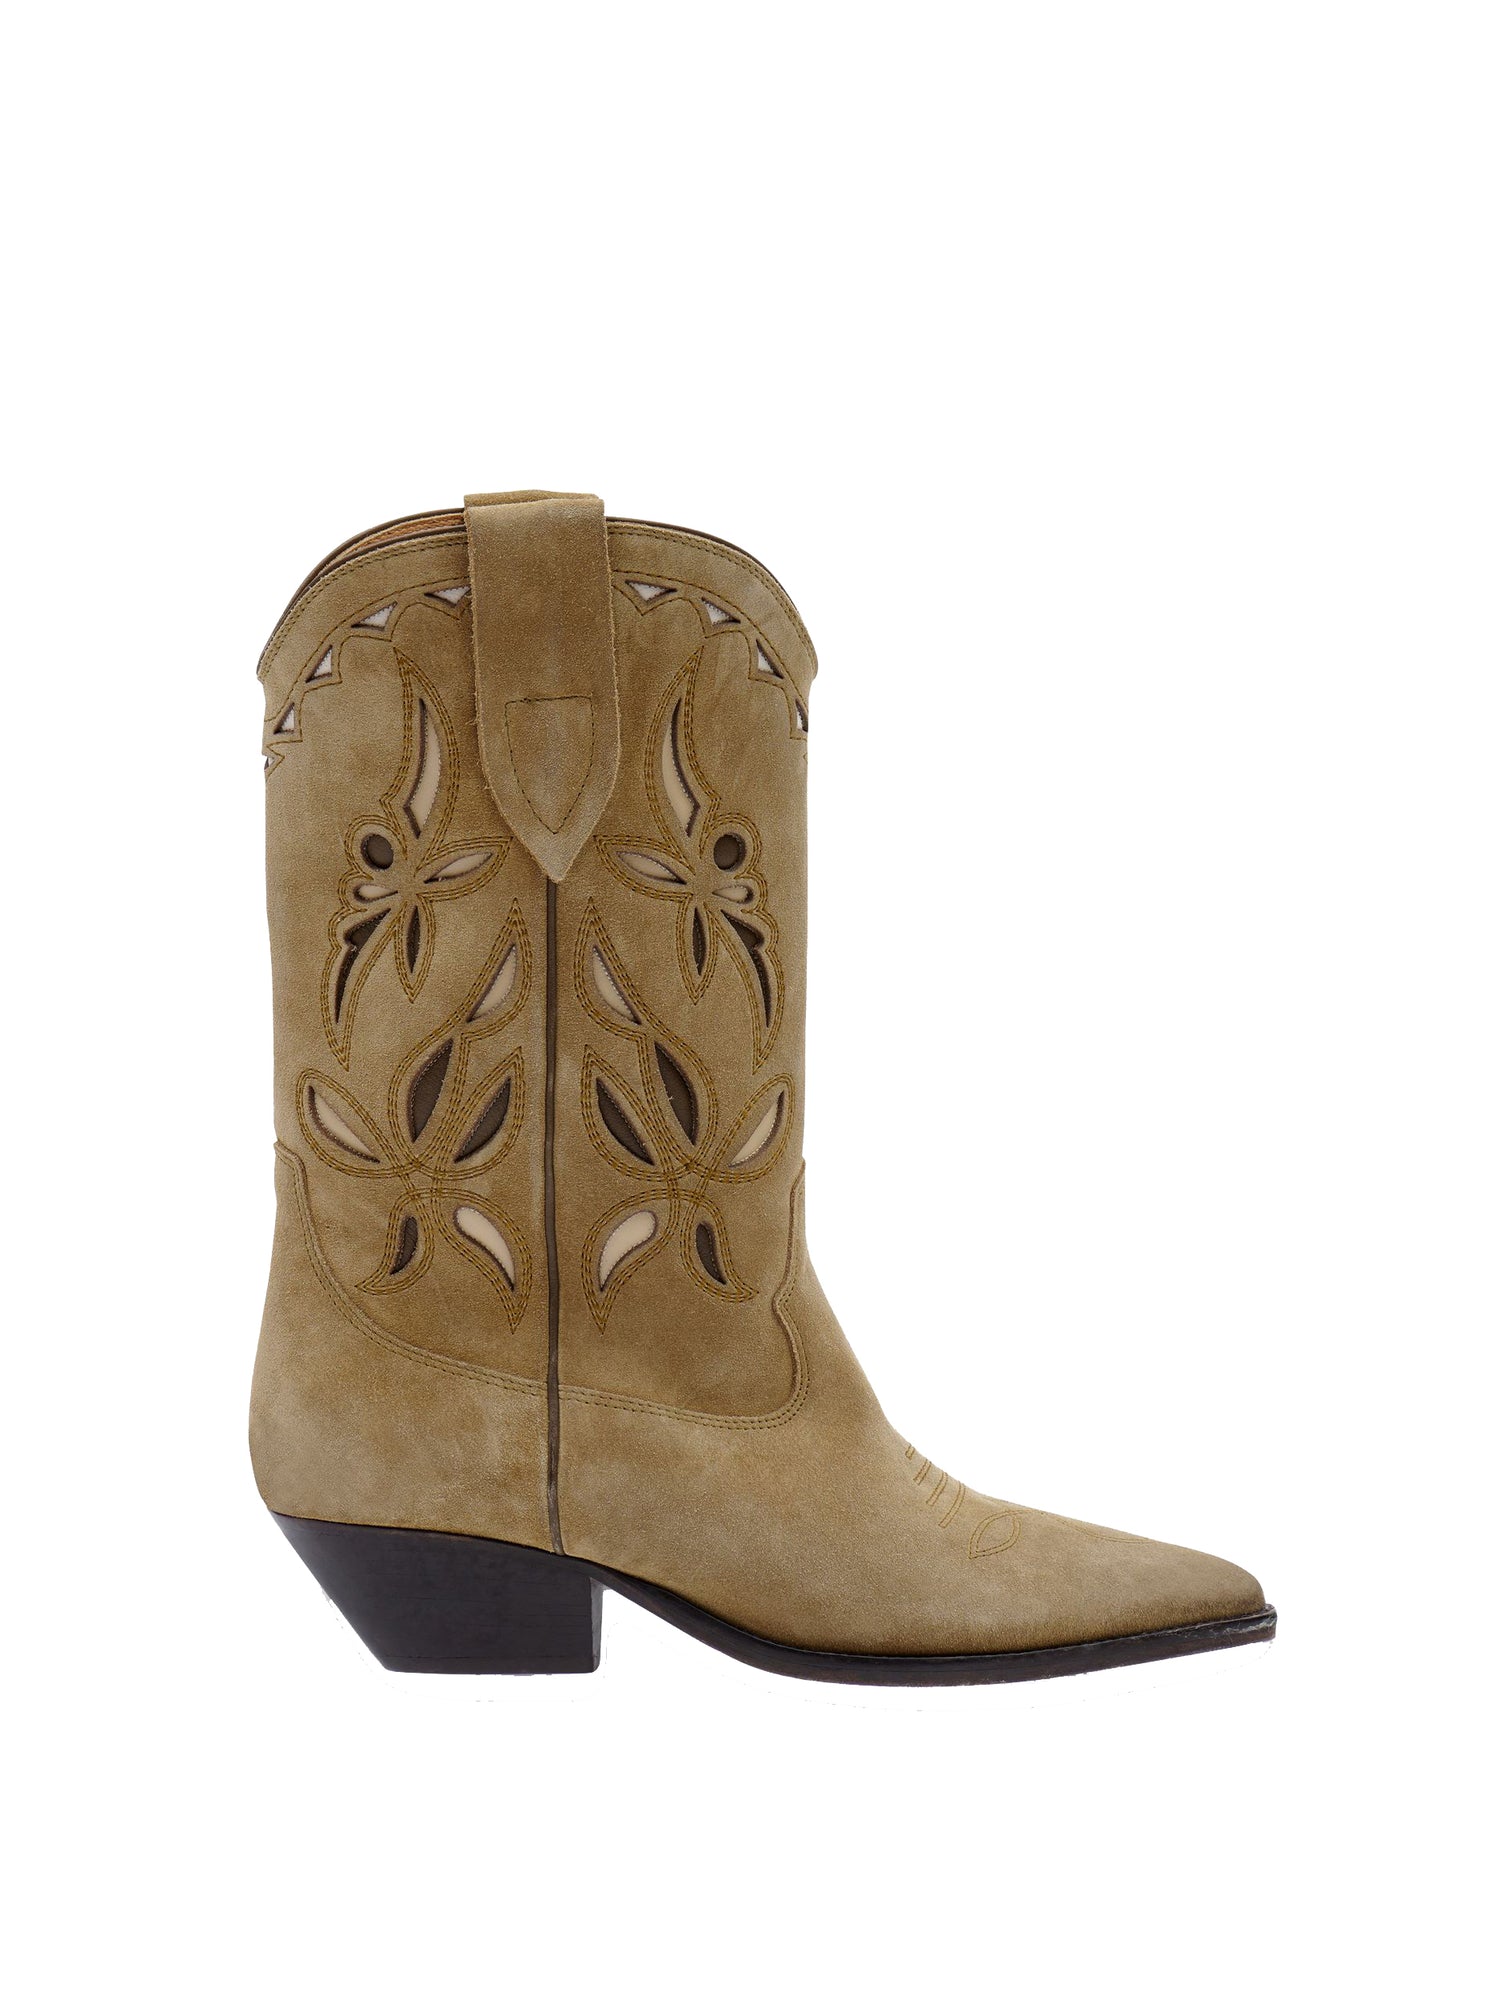 ISABEL MARANT: DUERTO cowboy boots, taupe suede